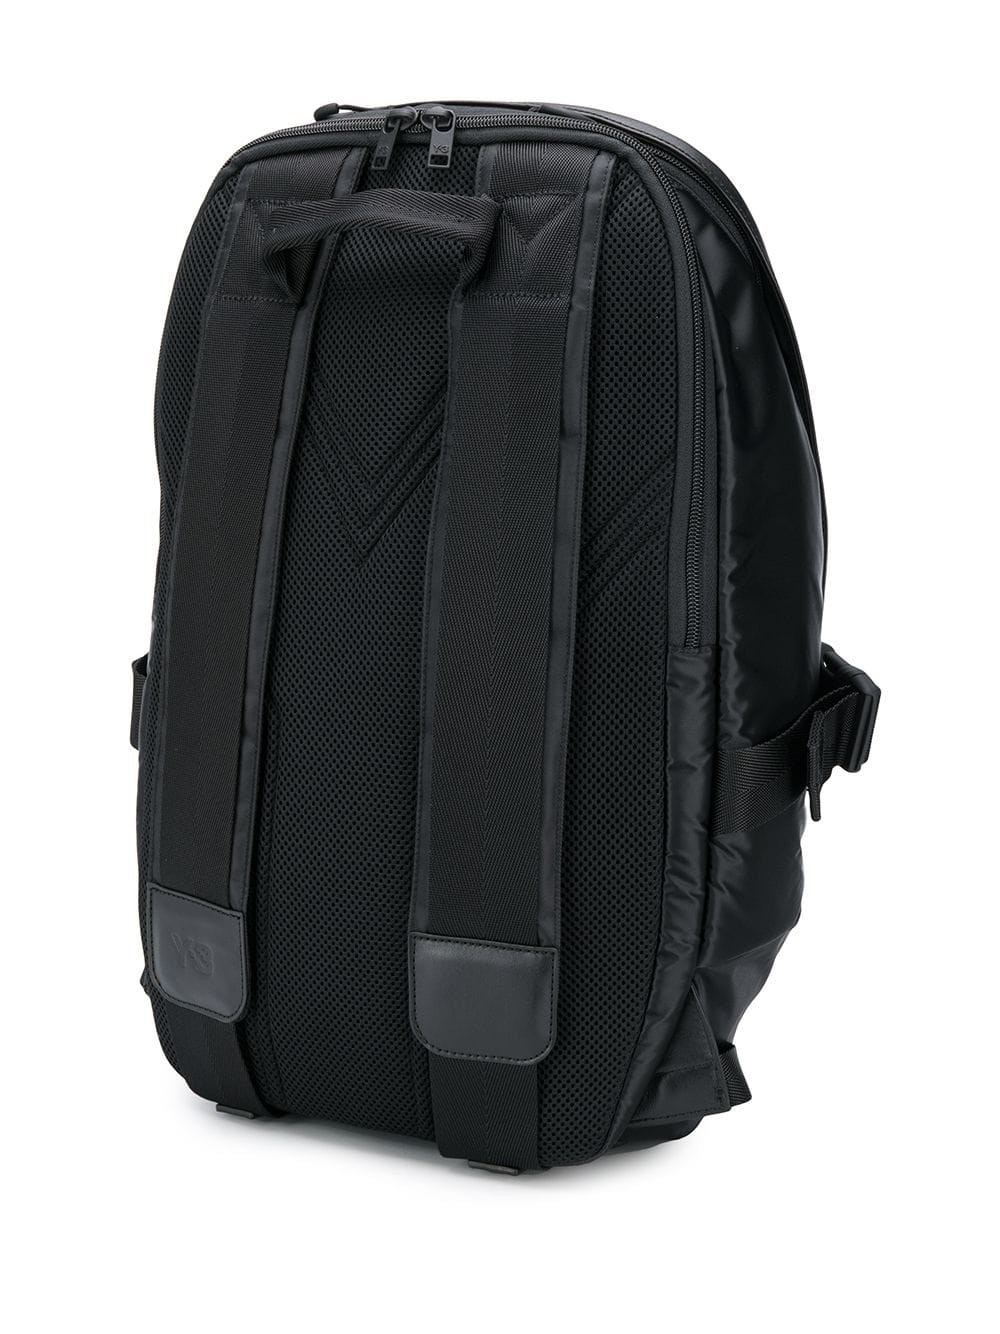 y-3 RACER BACKPACK available on montiboutique.com - 29910